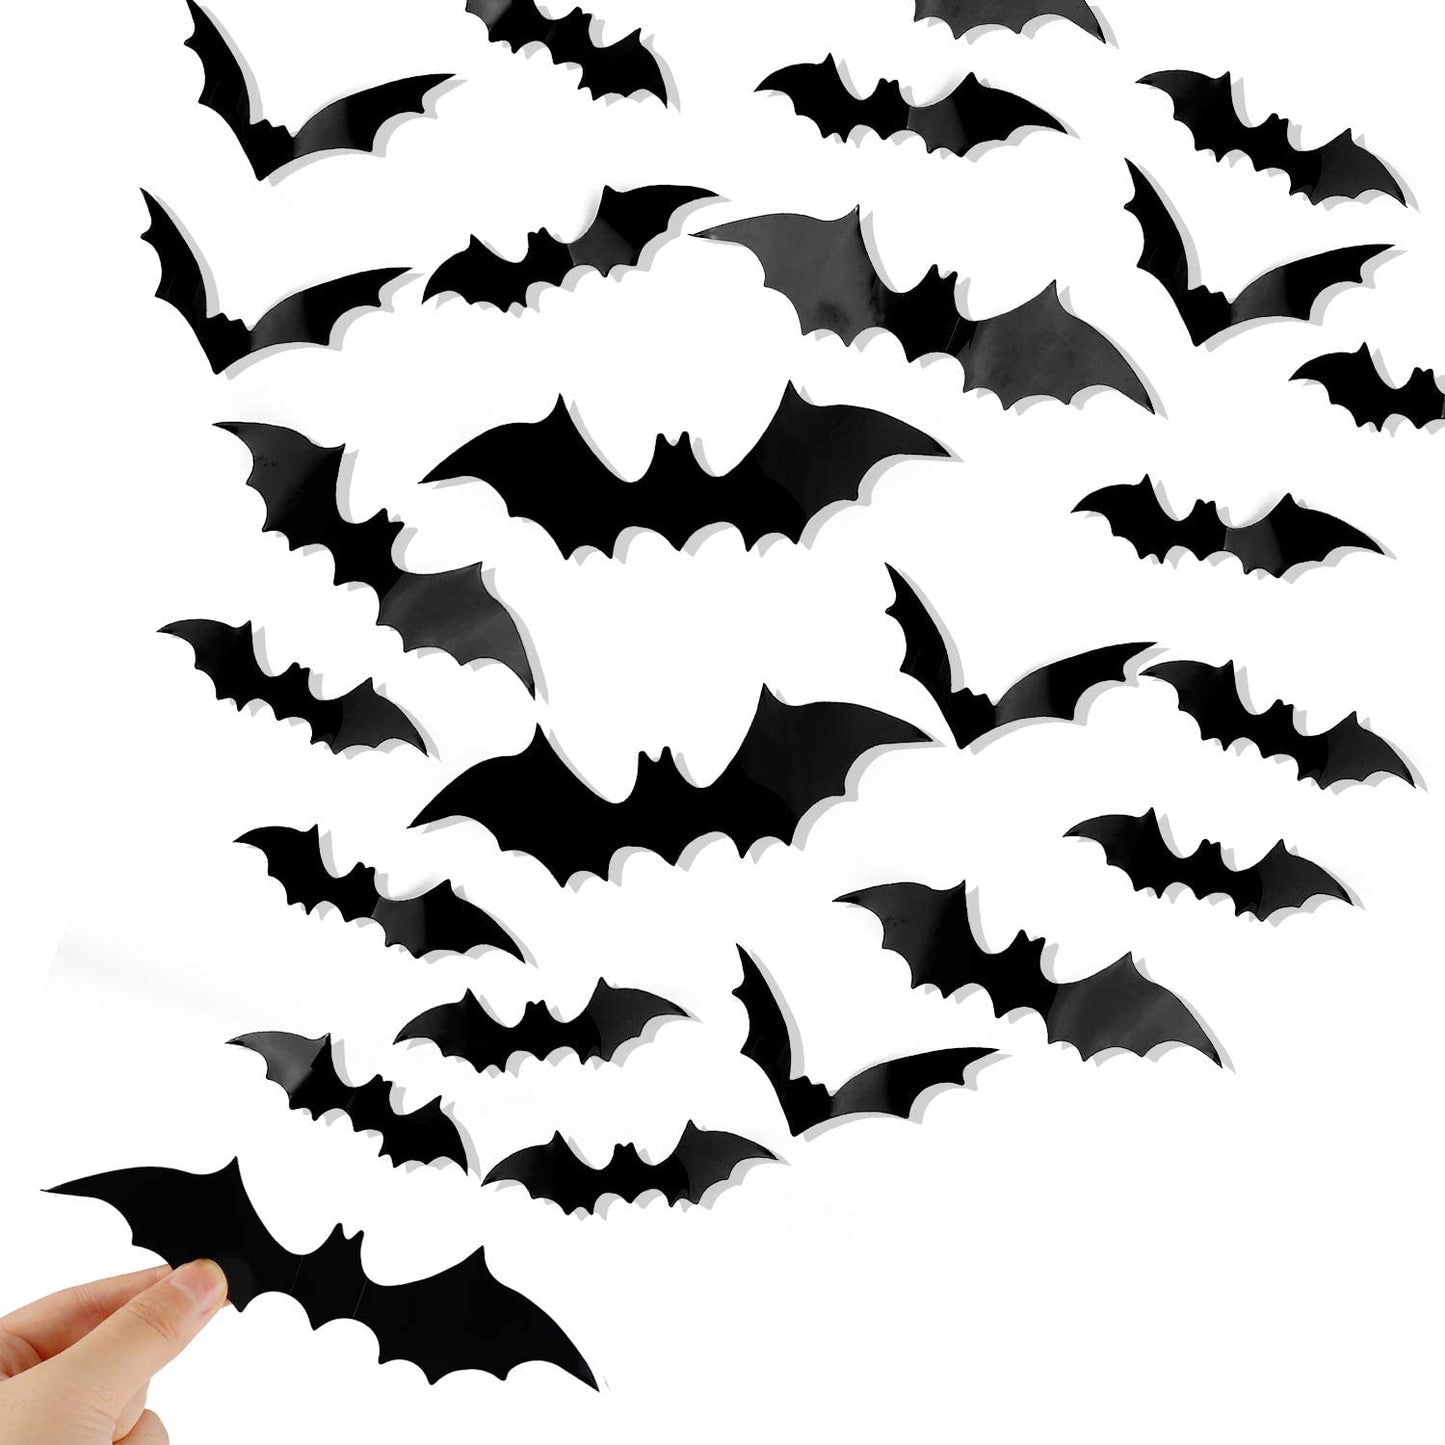 Enchanting Halloween Ambiance: DIYASY 120 Pcs 3D Bat Wall Decor - Waterproof Black Spooky Bat Stickers for Home Decoration and Room Décor in 4 Sizes